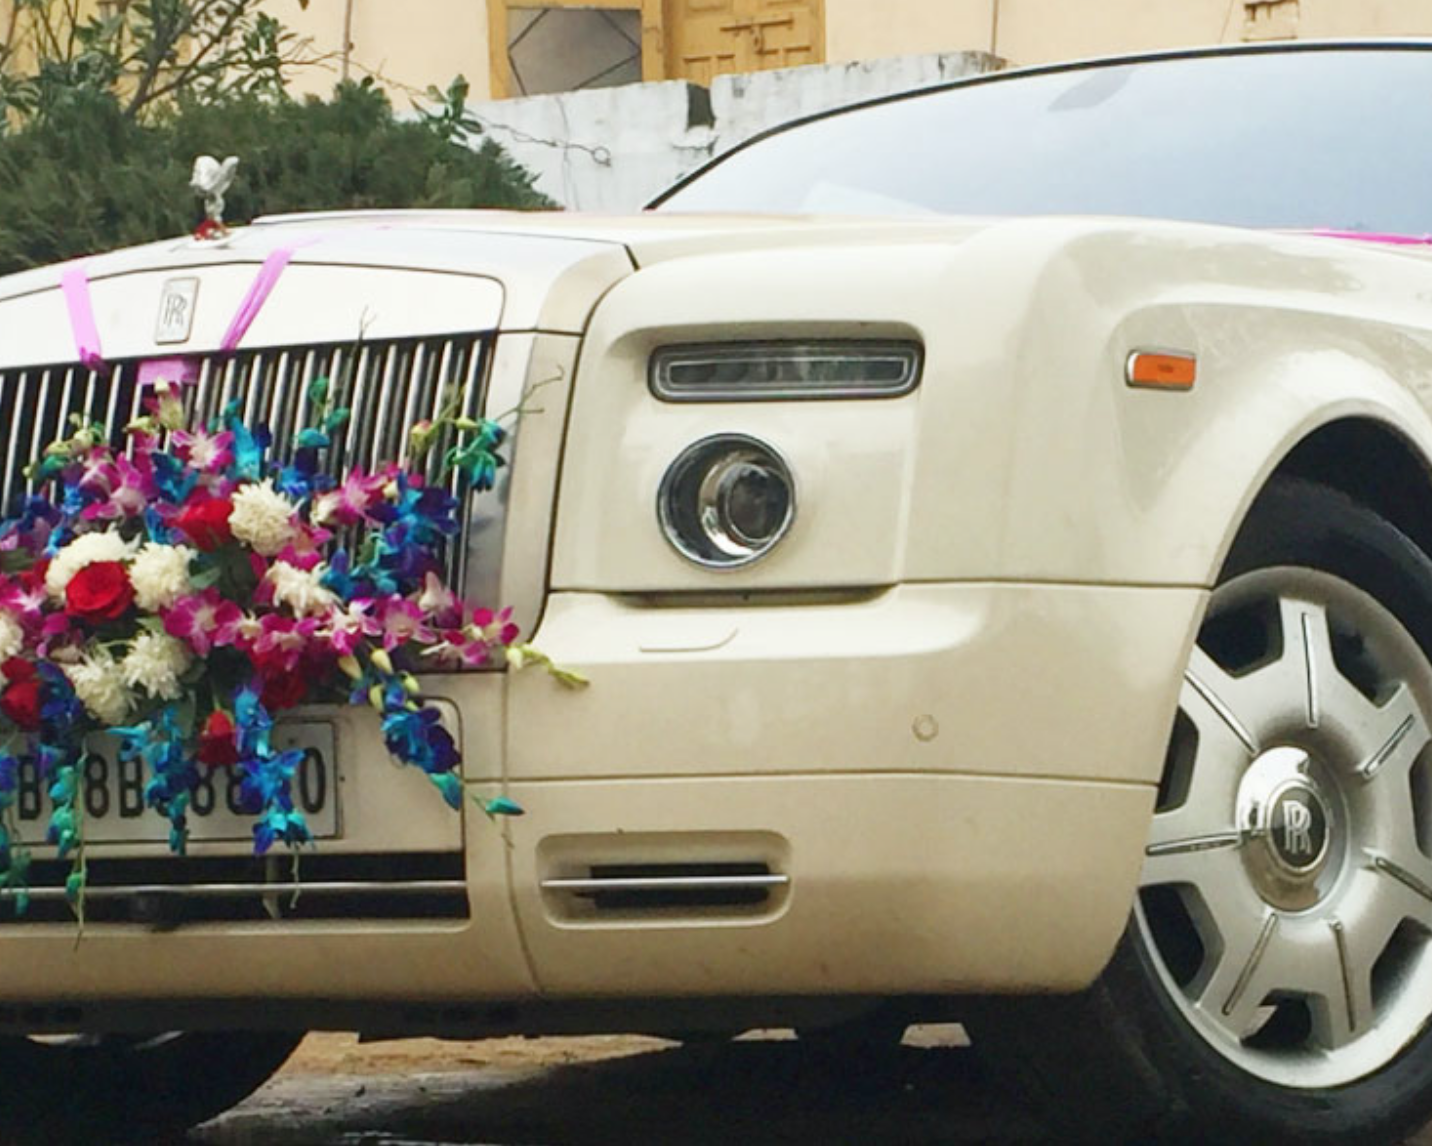 Rolls Royce for rent price on weddings in Ludhiana Punjab for hire